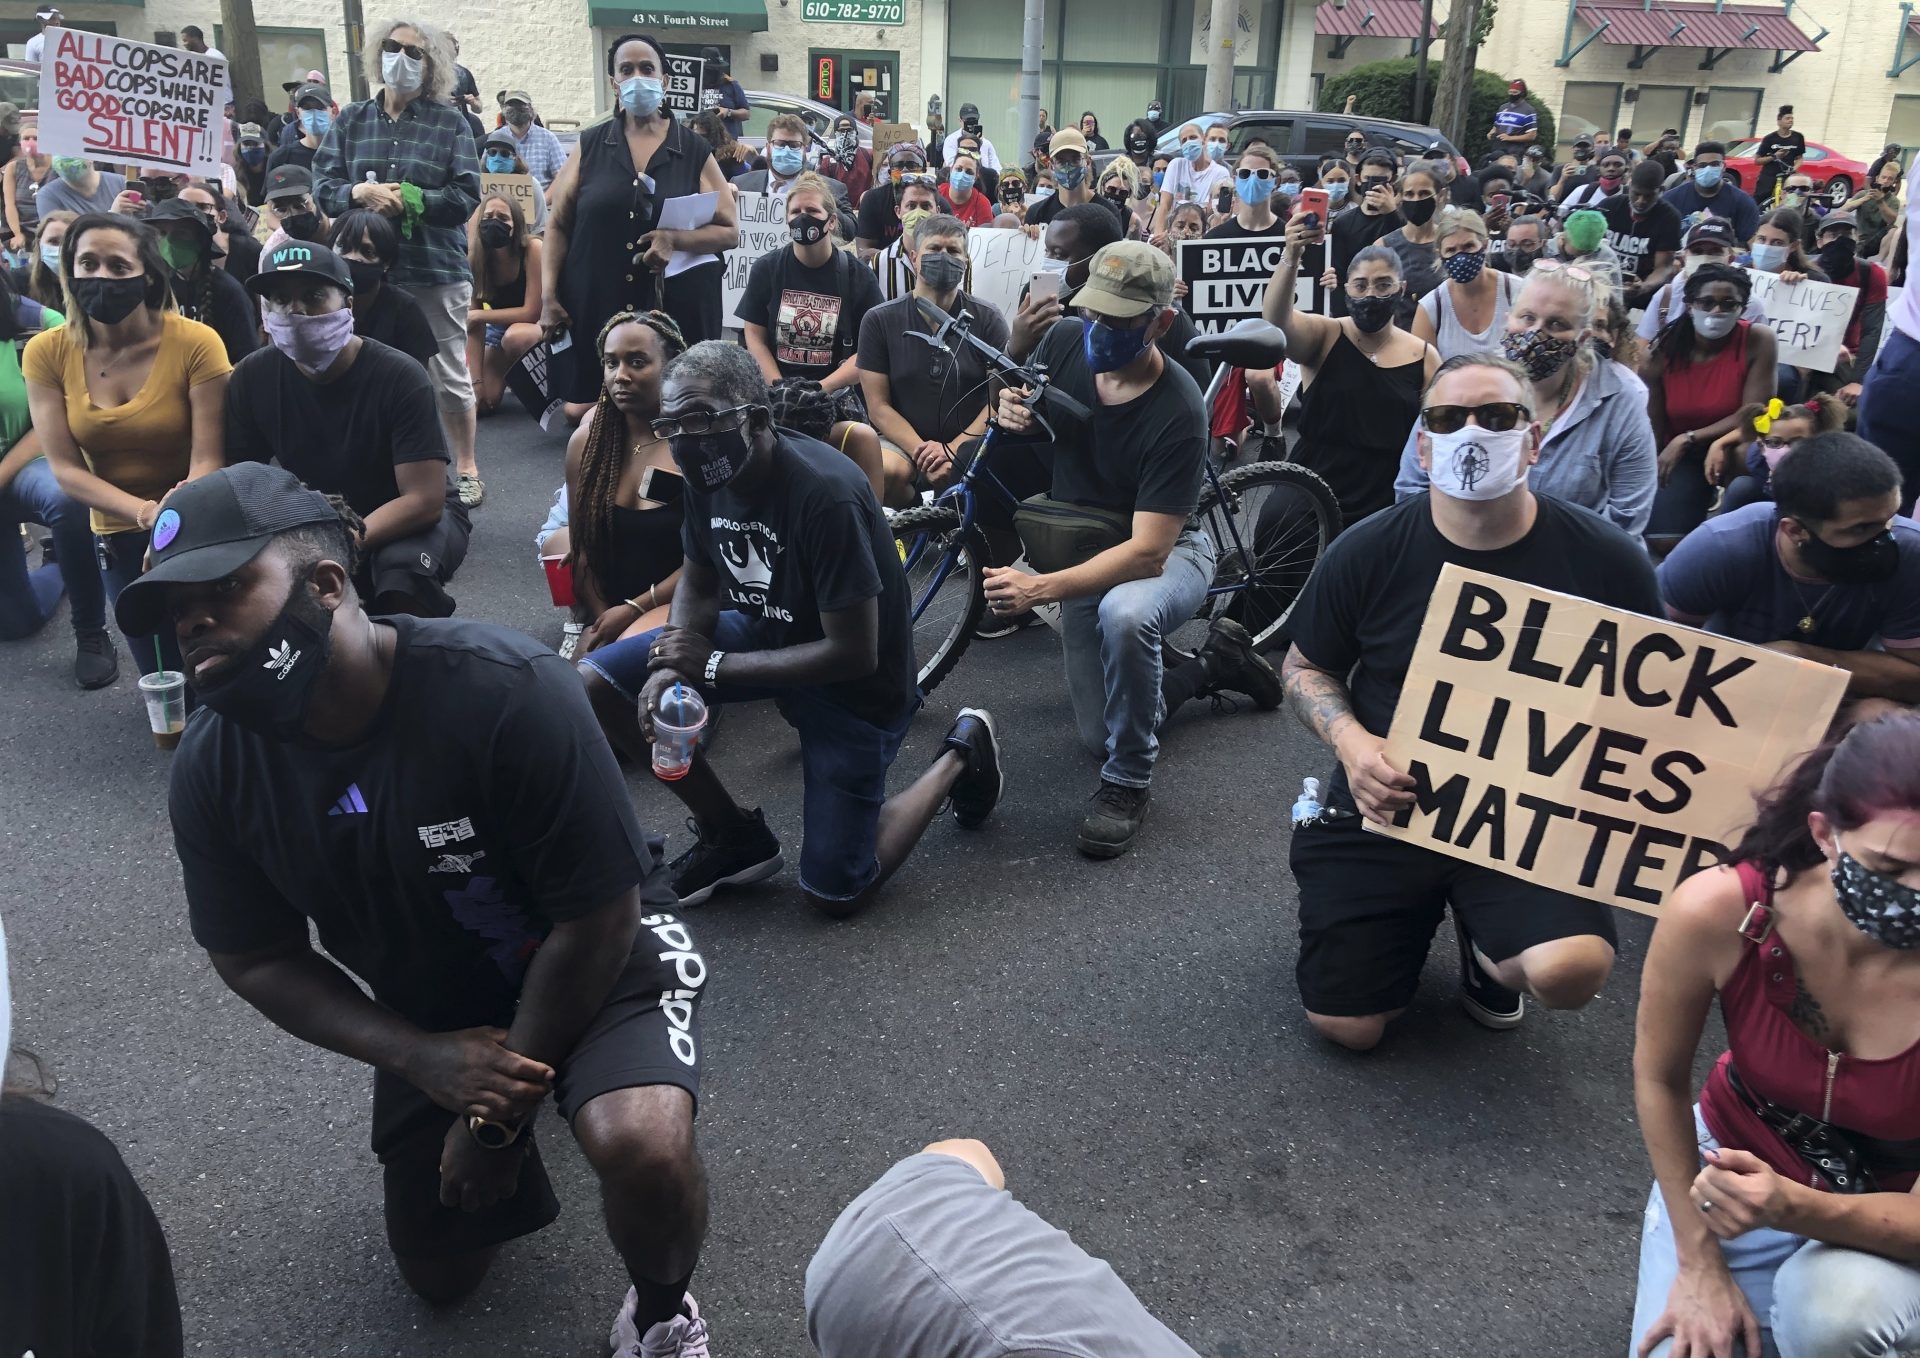 Protesters kneel in front of the Lehigh County Jail in Allentown, Pa., on Monday, July 13, 2020, to demonstrate against police brutality after video emerged of an officer placing his knee on a man's head and neck area outside a city hospital. Police have launched an internal probe.